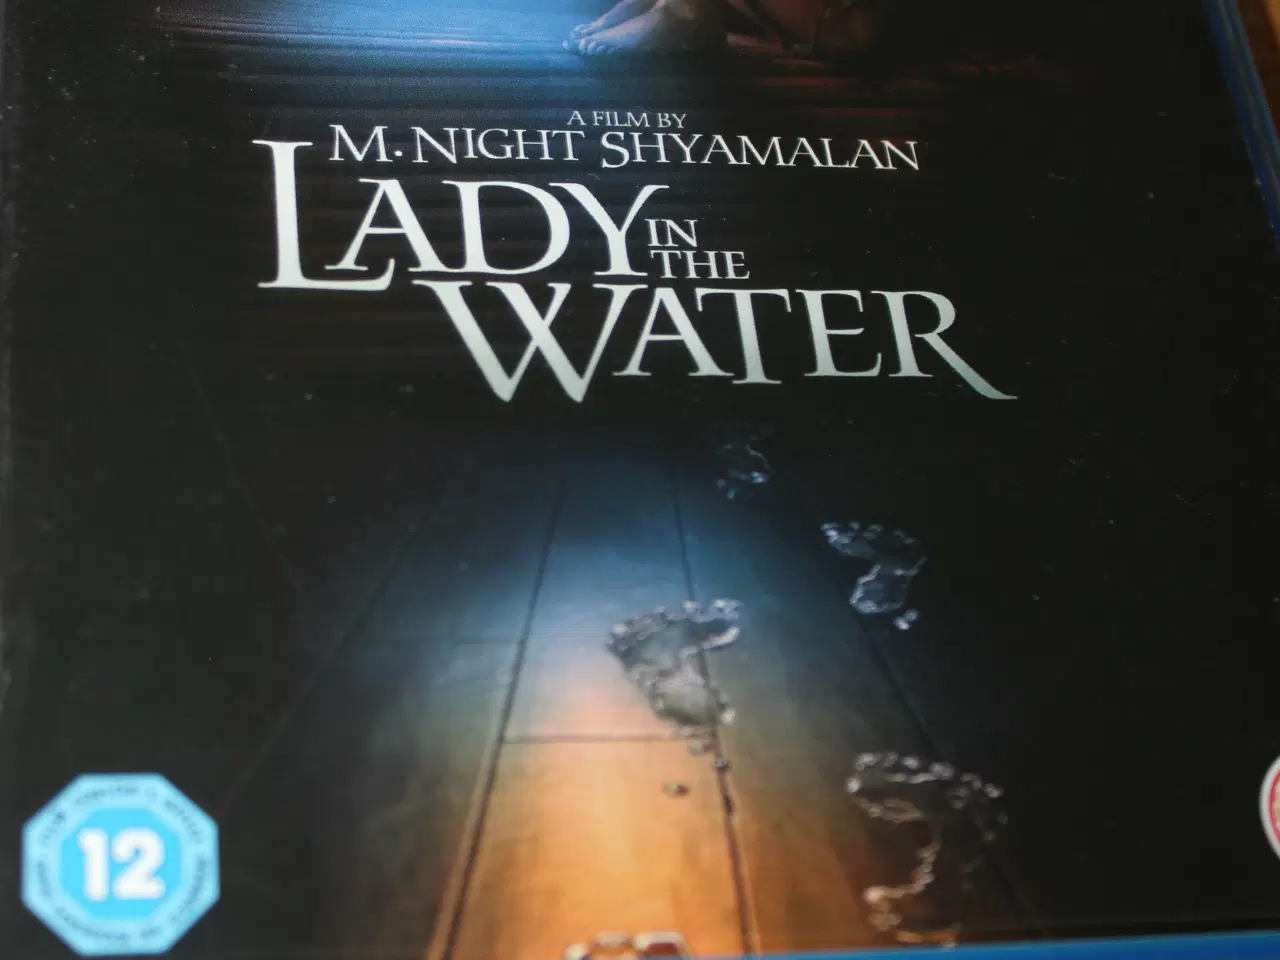 Billede 1 - Lady in the water, Blu-ray, thriller